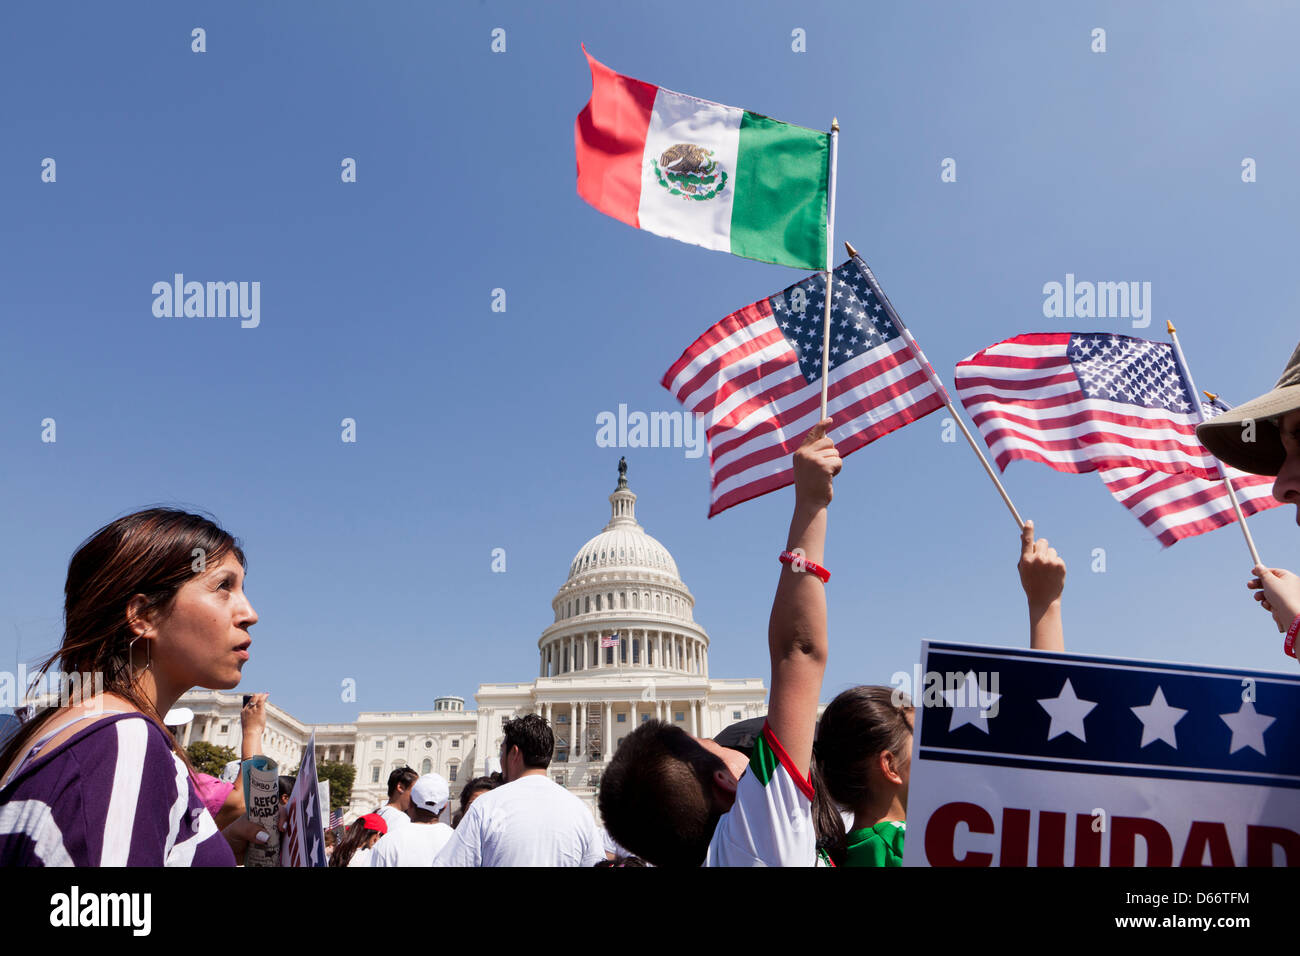 Young boy waving a Mexican flag in front of the US Capitol building during an immigration reform rally - Washington, DC USA Stock Photo